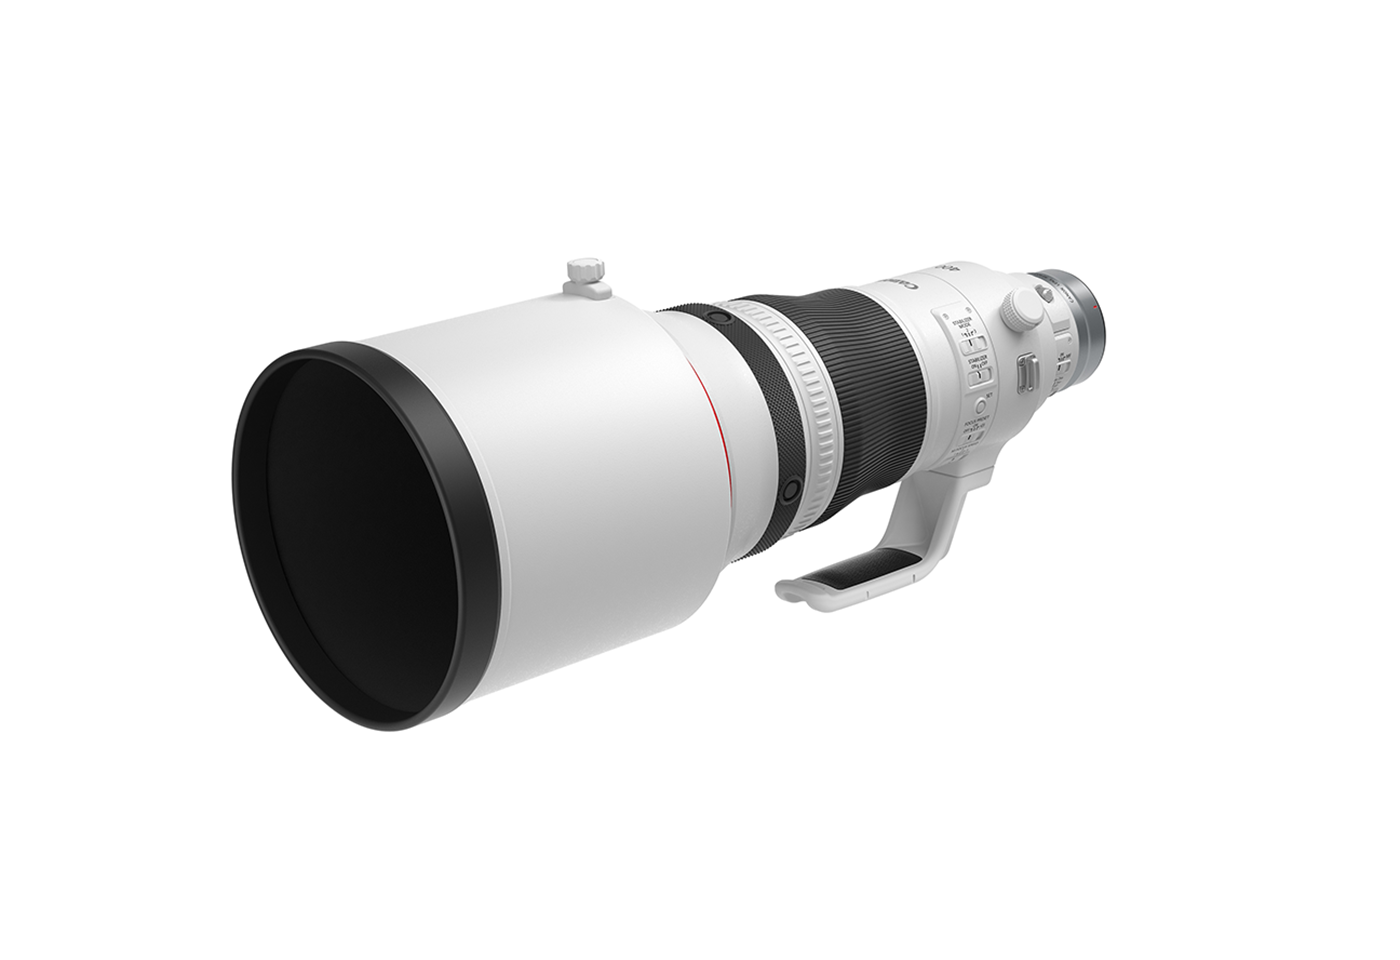 Front profile image of the RF 400mm f/2.8 L IS USM telephoto lens with hood